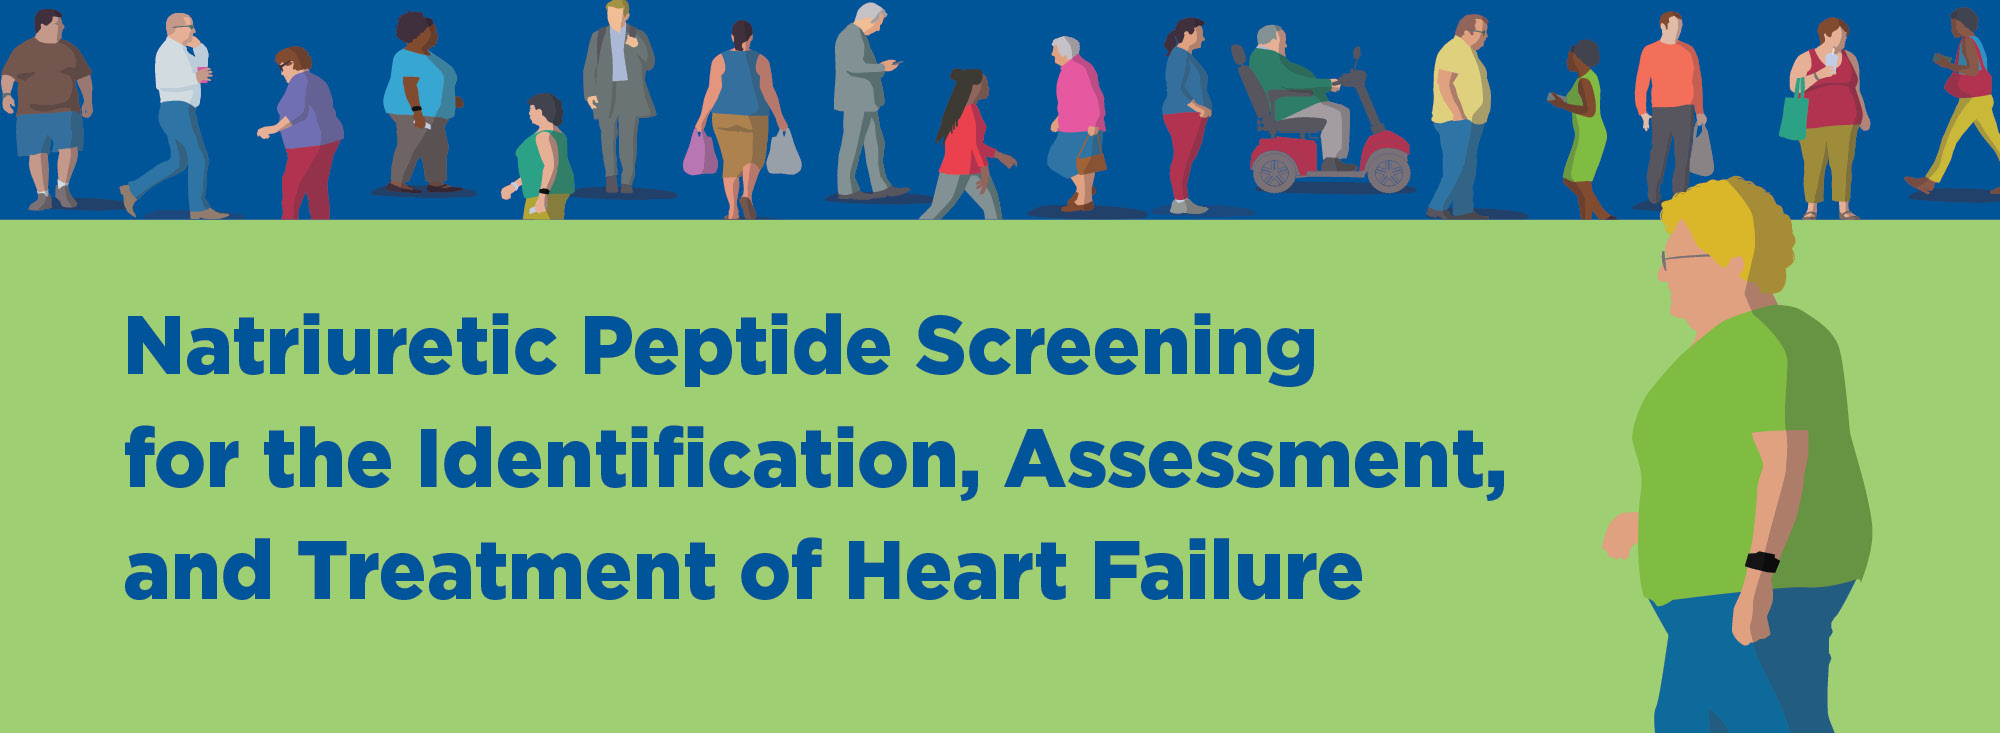 Natriuretic Peptide Screening for the Identification, Assessment, and Treatment of Heart Failure